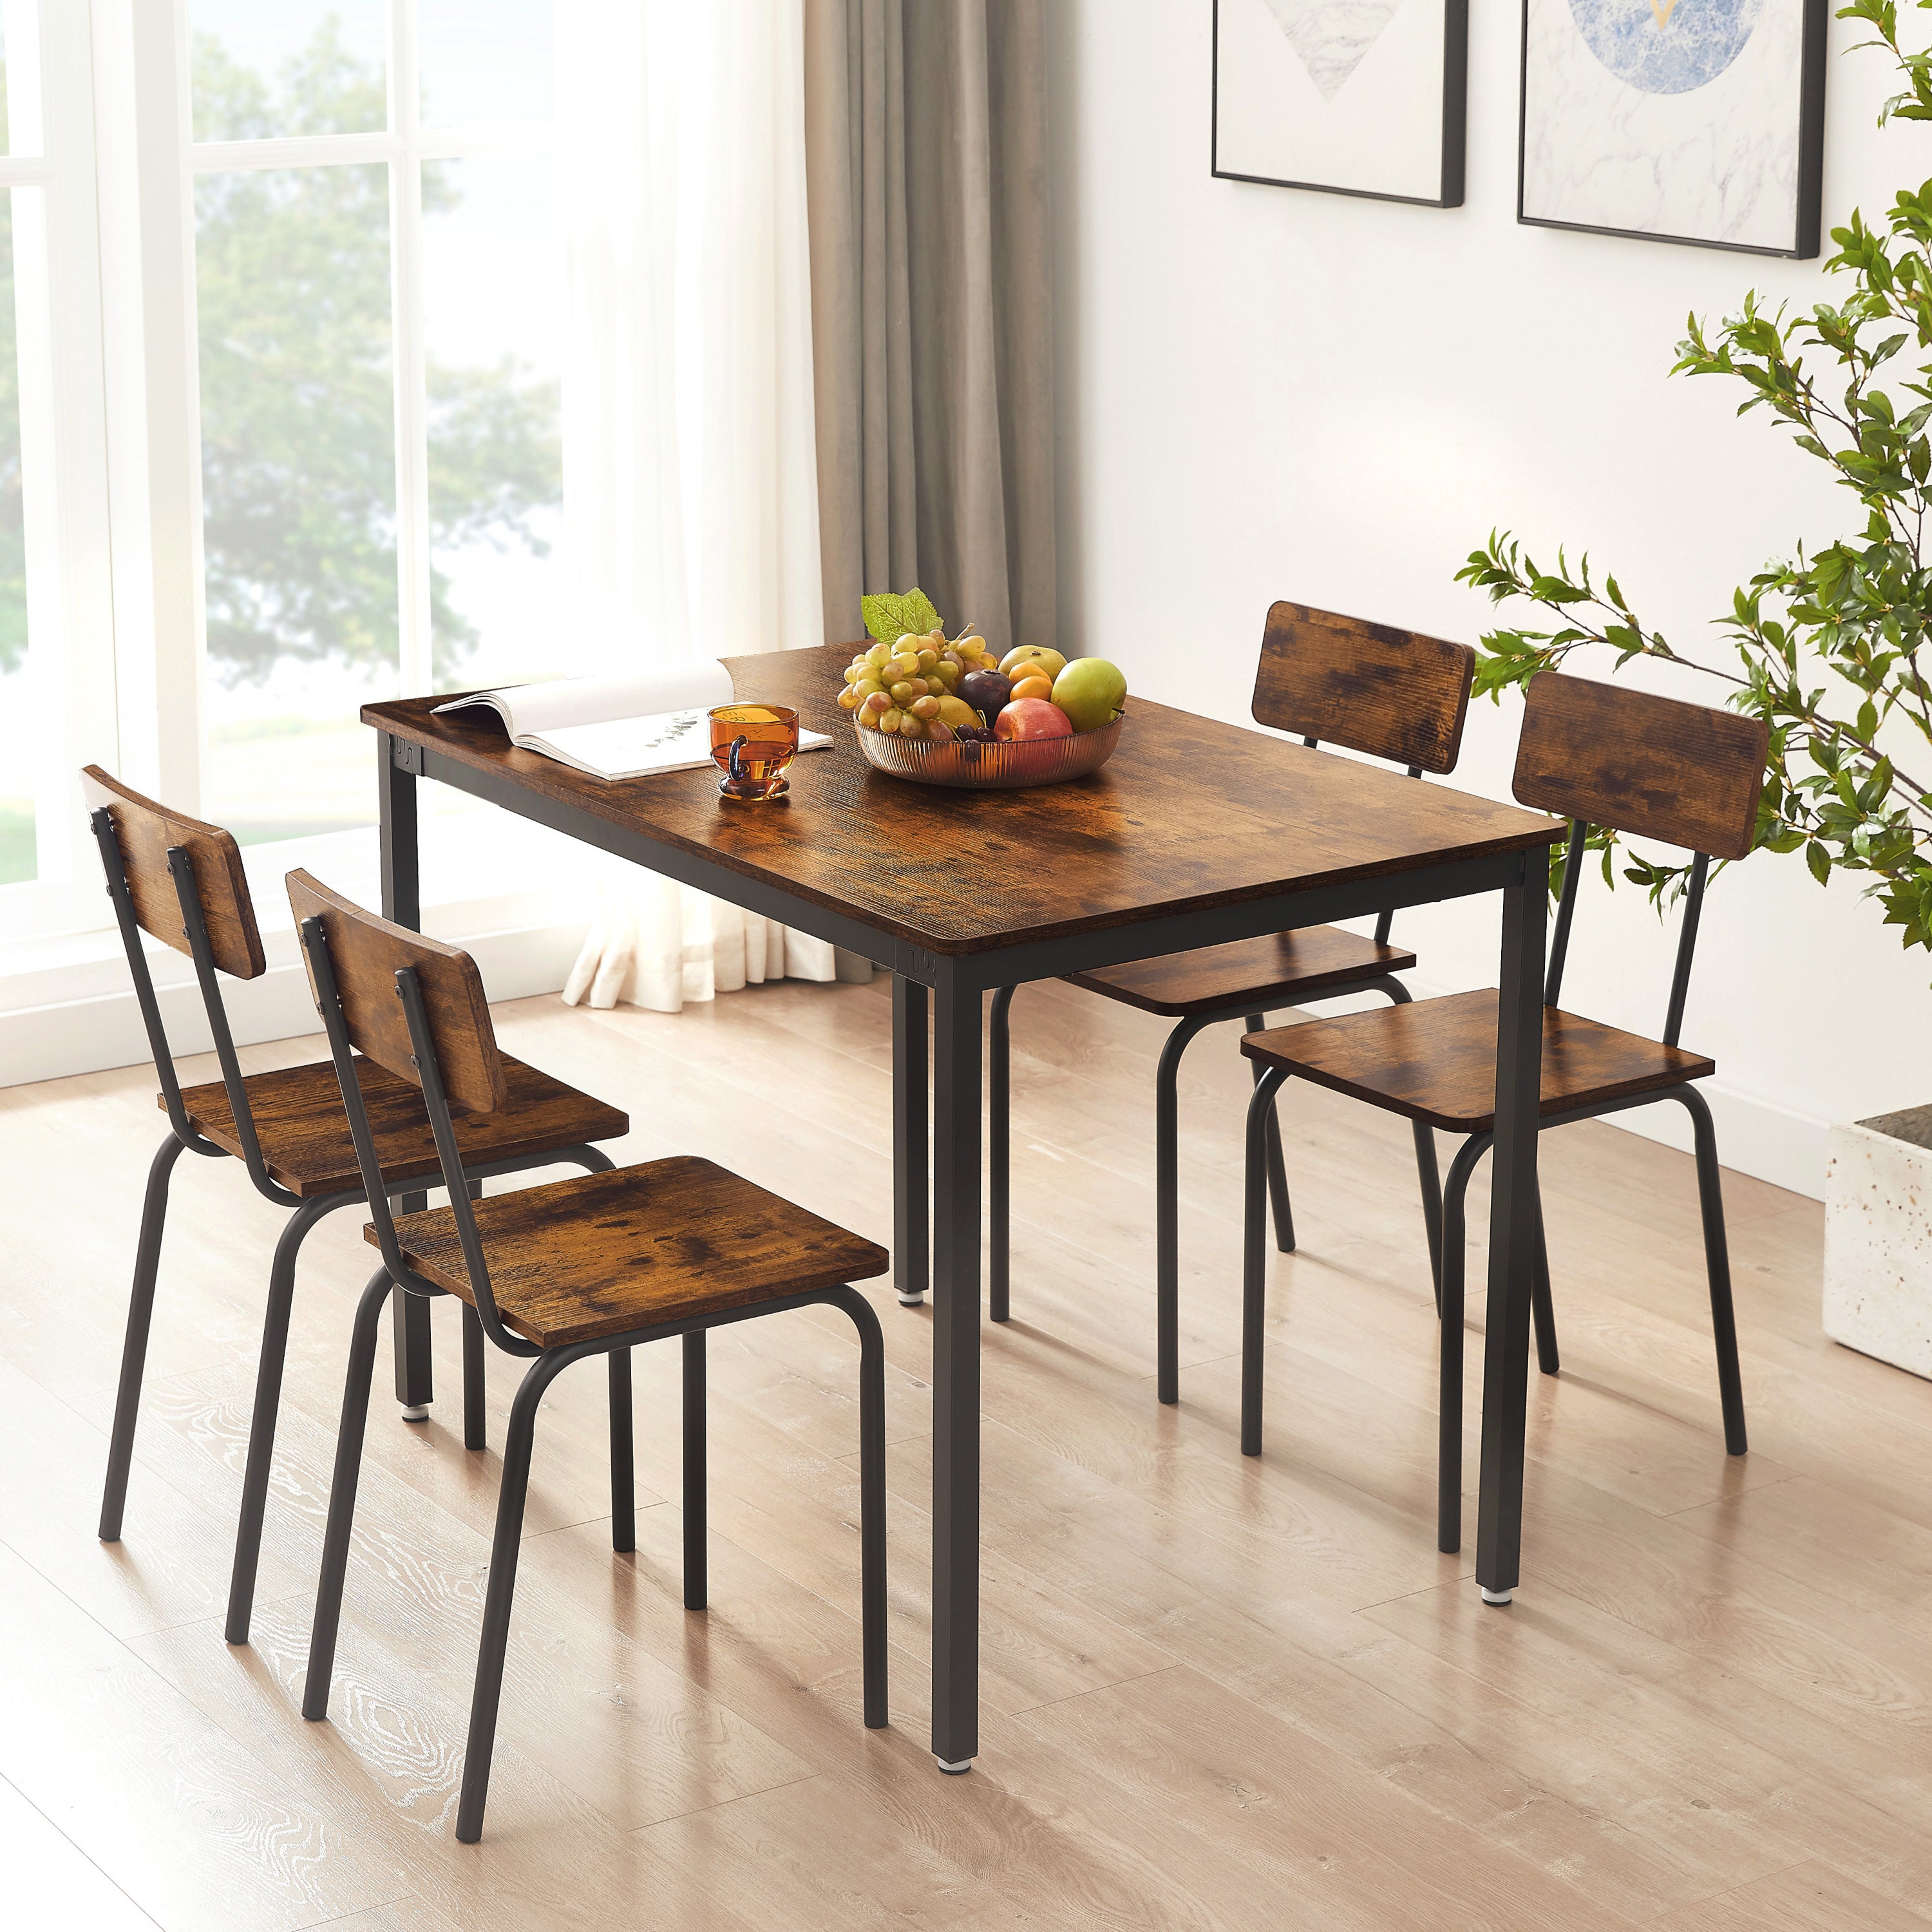 🆓🚛 Dining Table Set 5-Piece Dining Chair With Backrest, Industrial Style, Sturdy Construction, Rustic Brown, 43.31'' L X 27.56'' W X 30.32'' H.